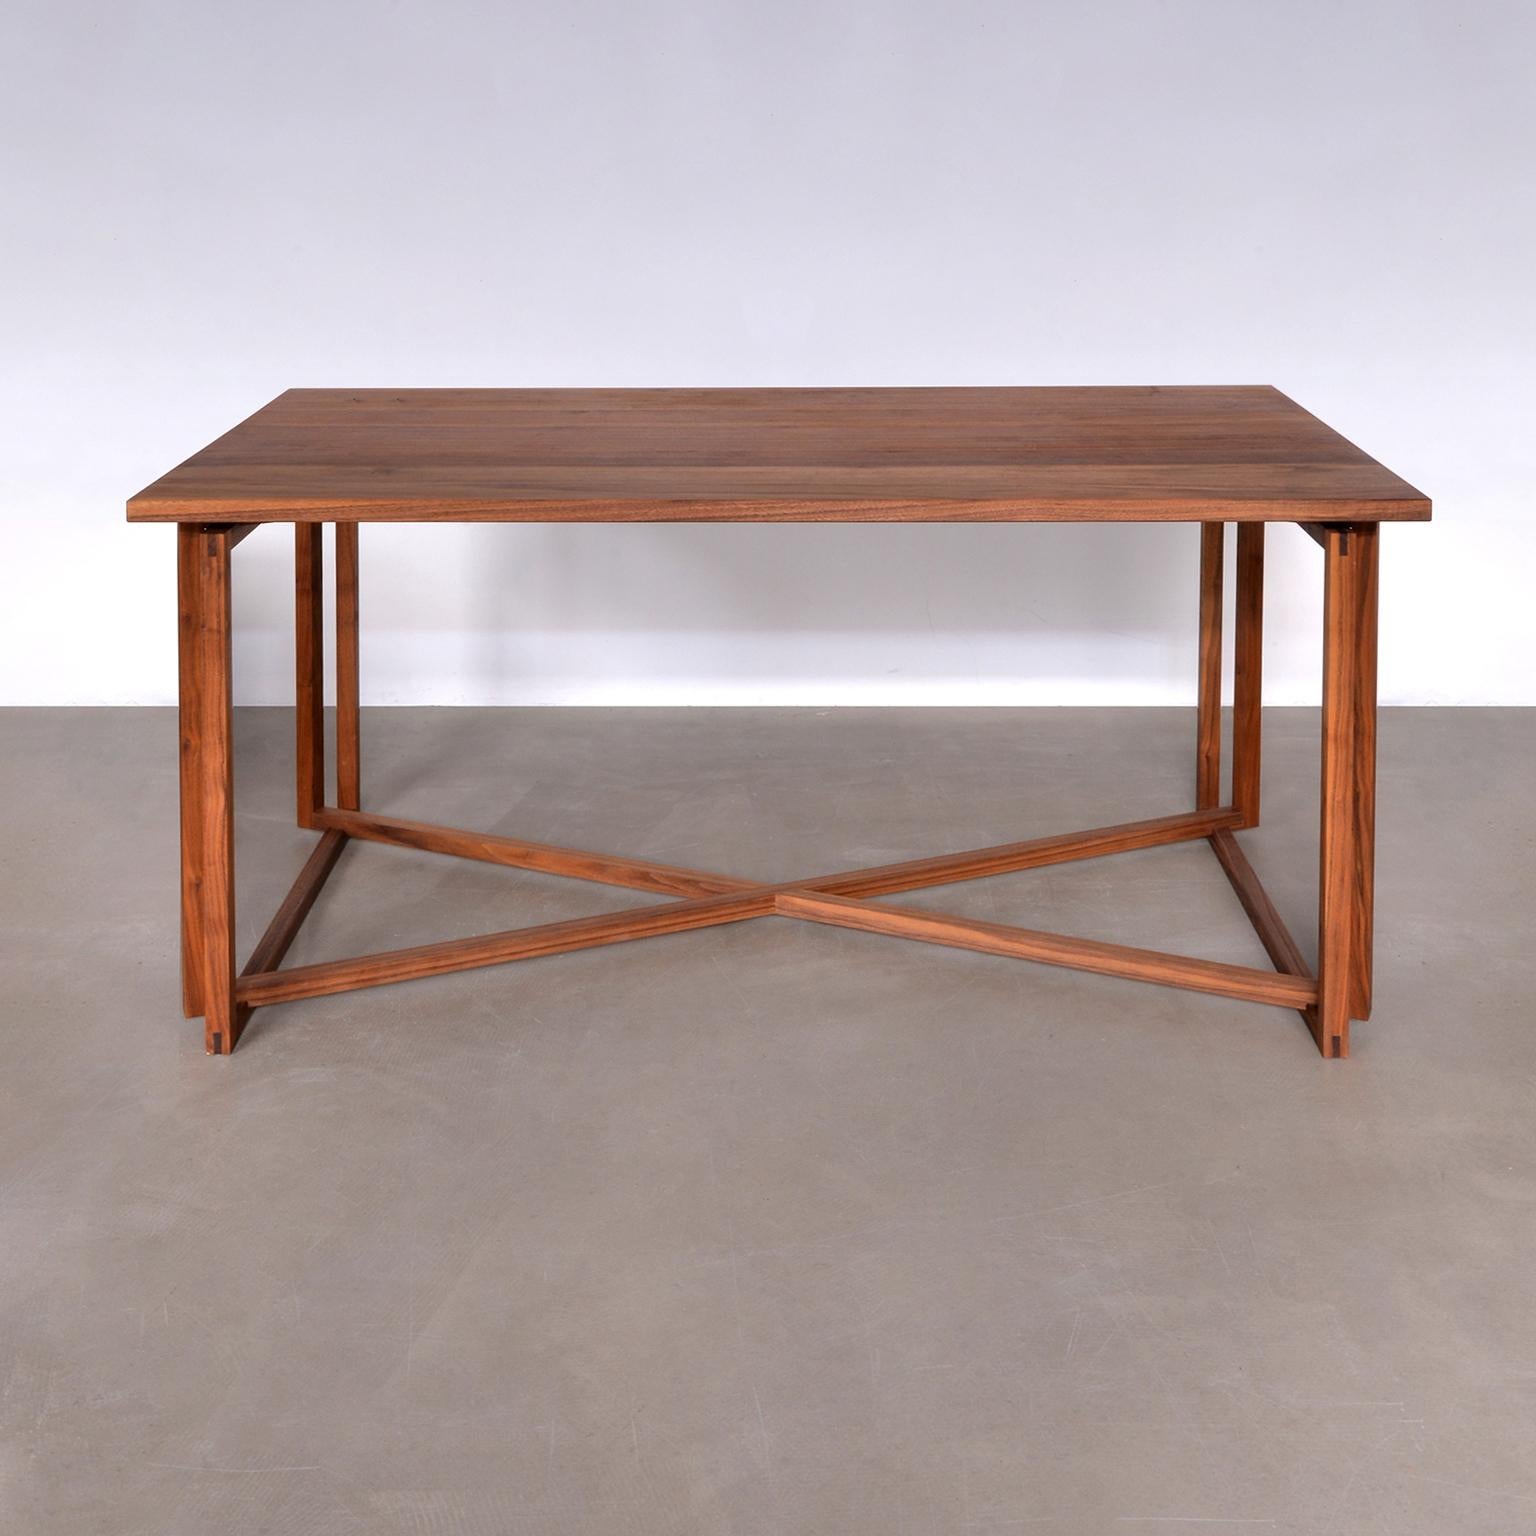 Unique hand crafted table in solid walnut wood designed by Laura Maasry and manufactured in Berlin, 2020.

Crafted by a master carpenter, the Fourframes-X is made is made with 100% high 
quality solid walnut wood for the tabletop and for the